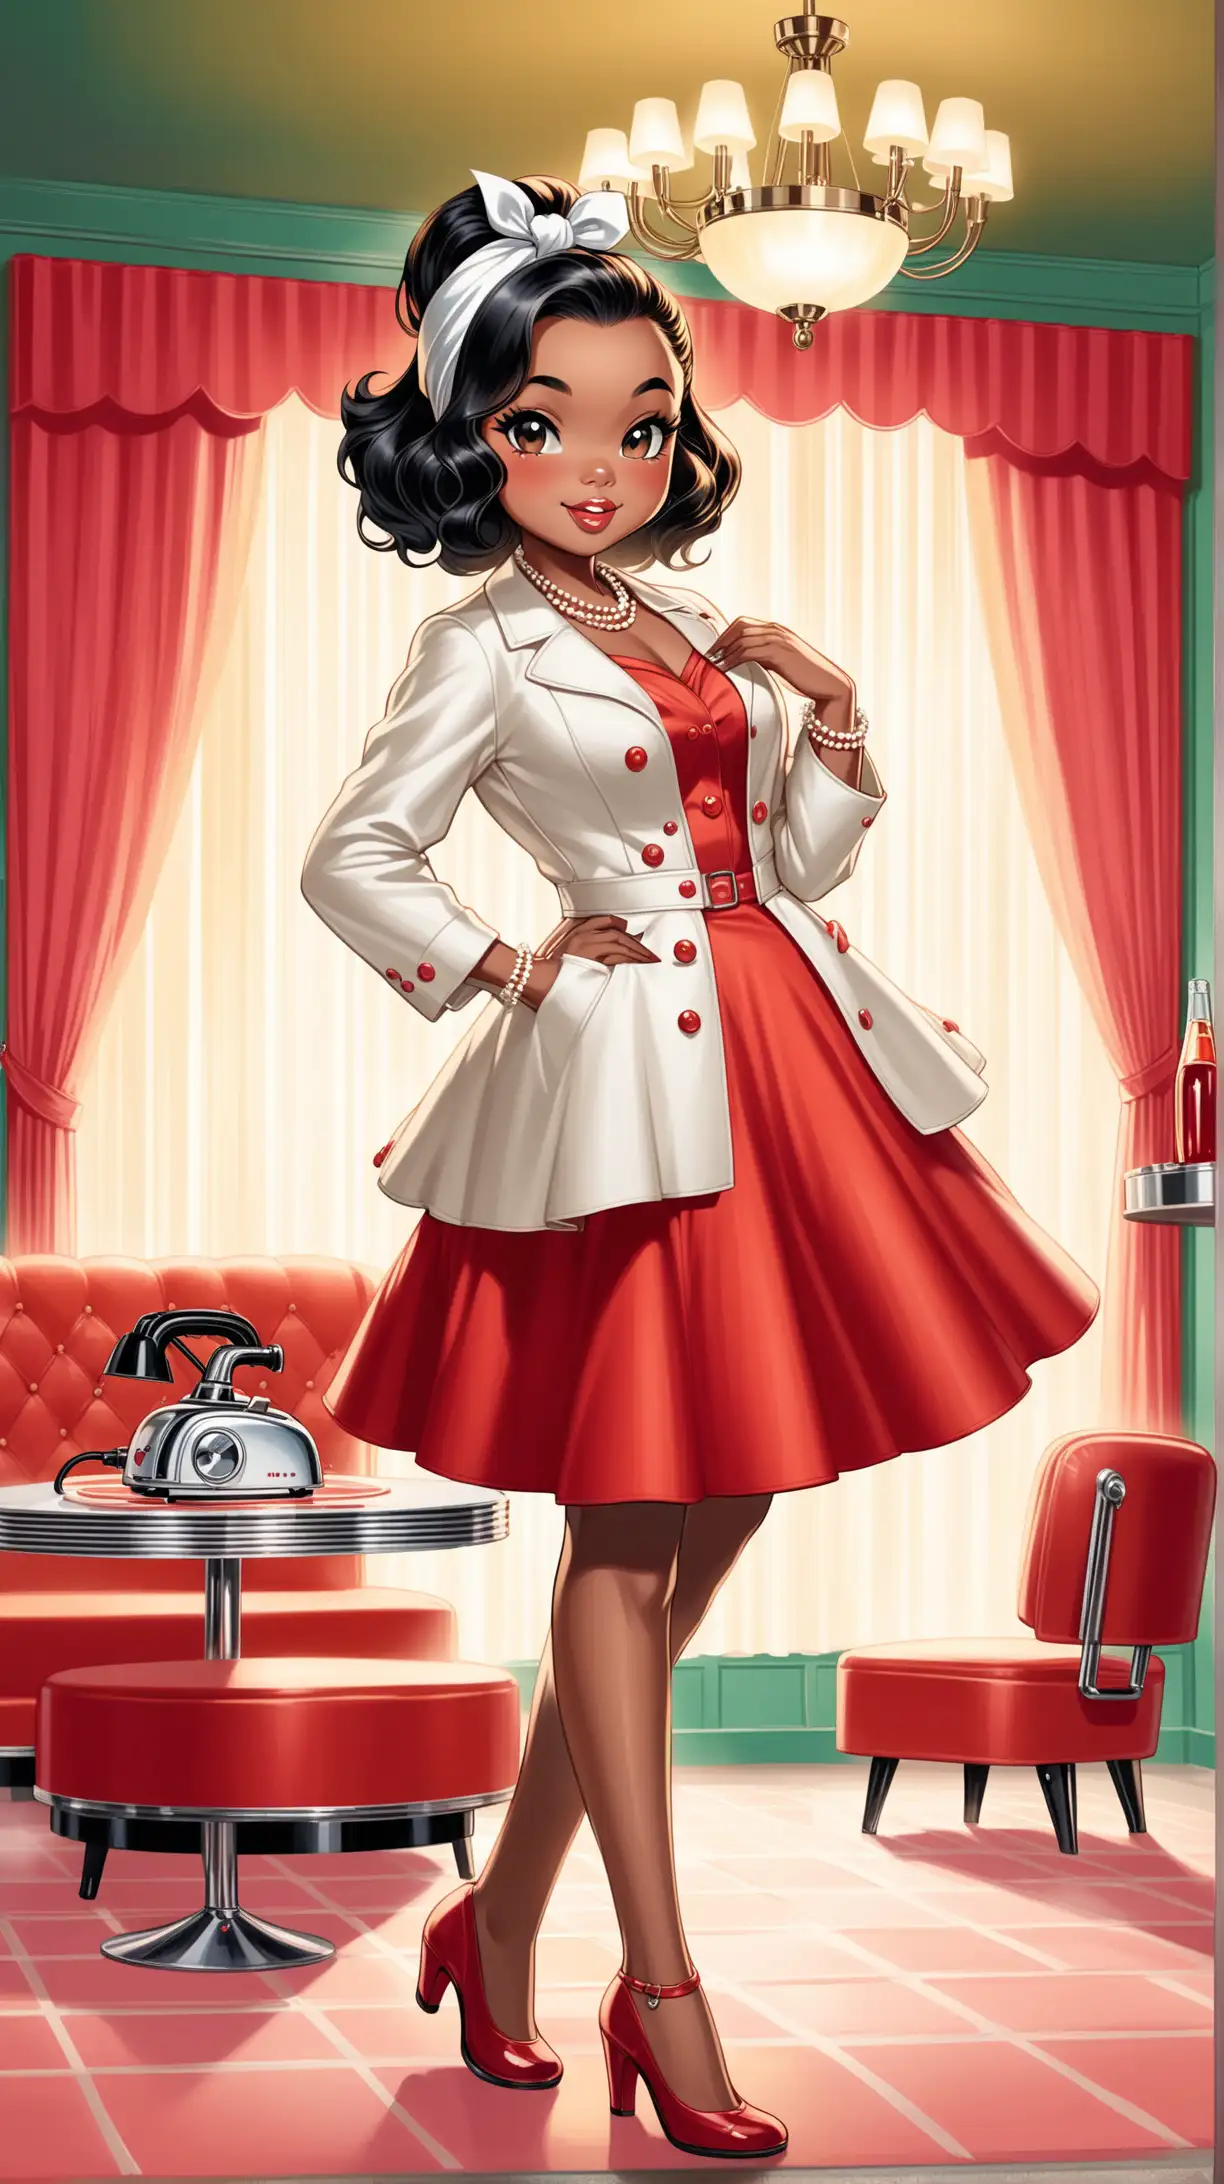 Glamorous African American Woman in 1950s Diner Playfully Vacuuming